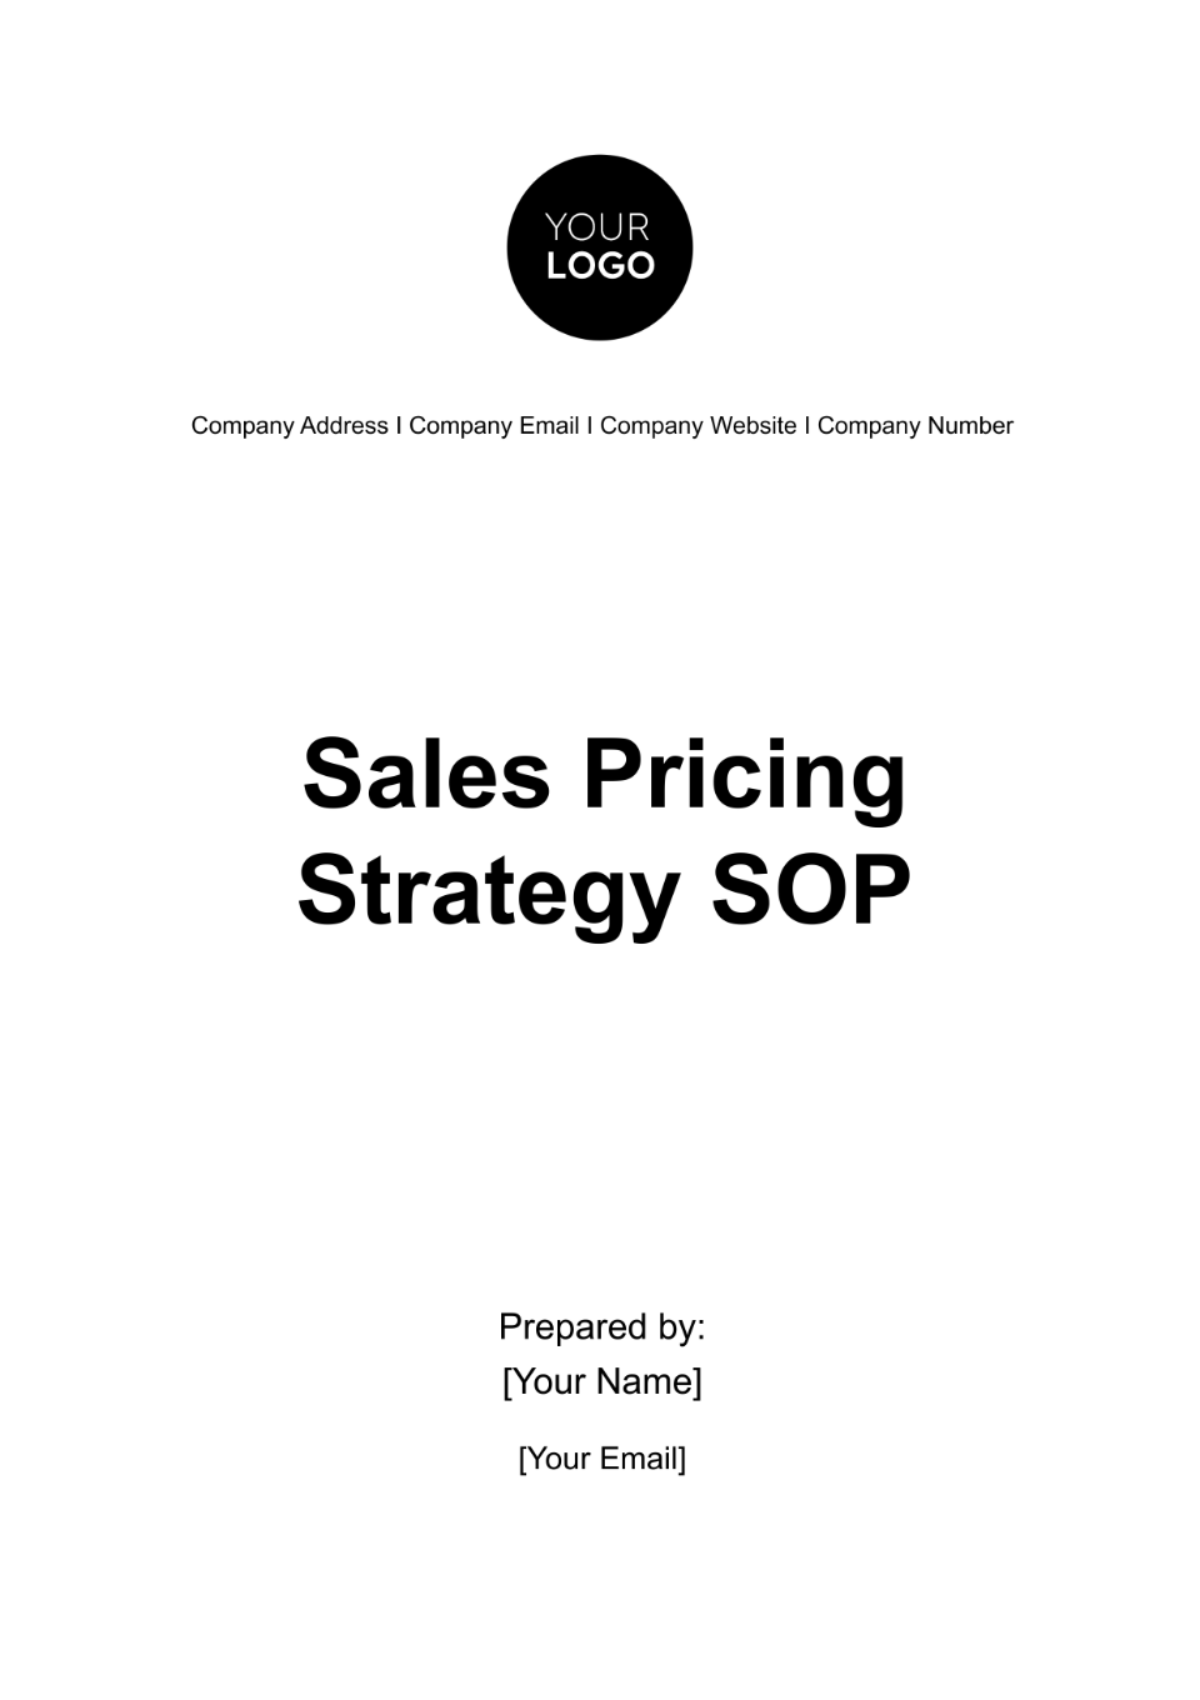 Free Sales Pricing Strategy SOP Template